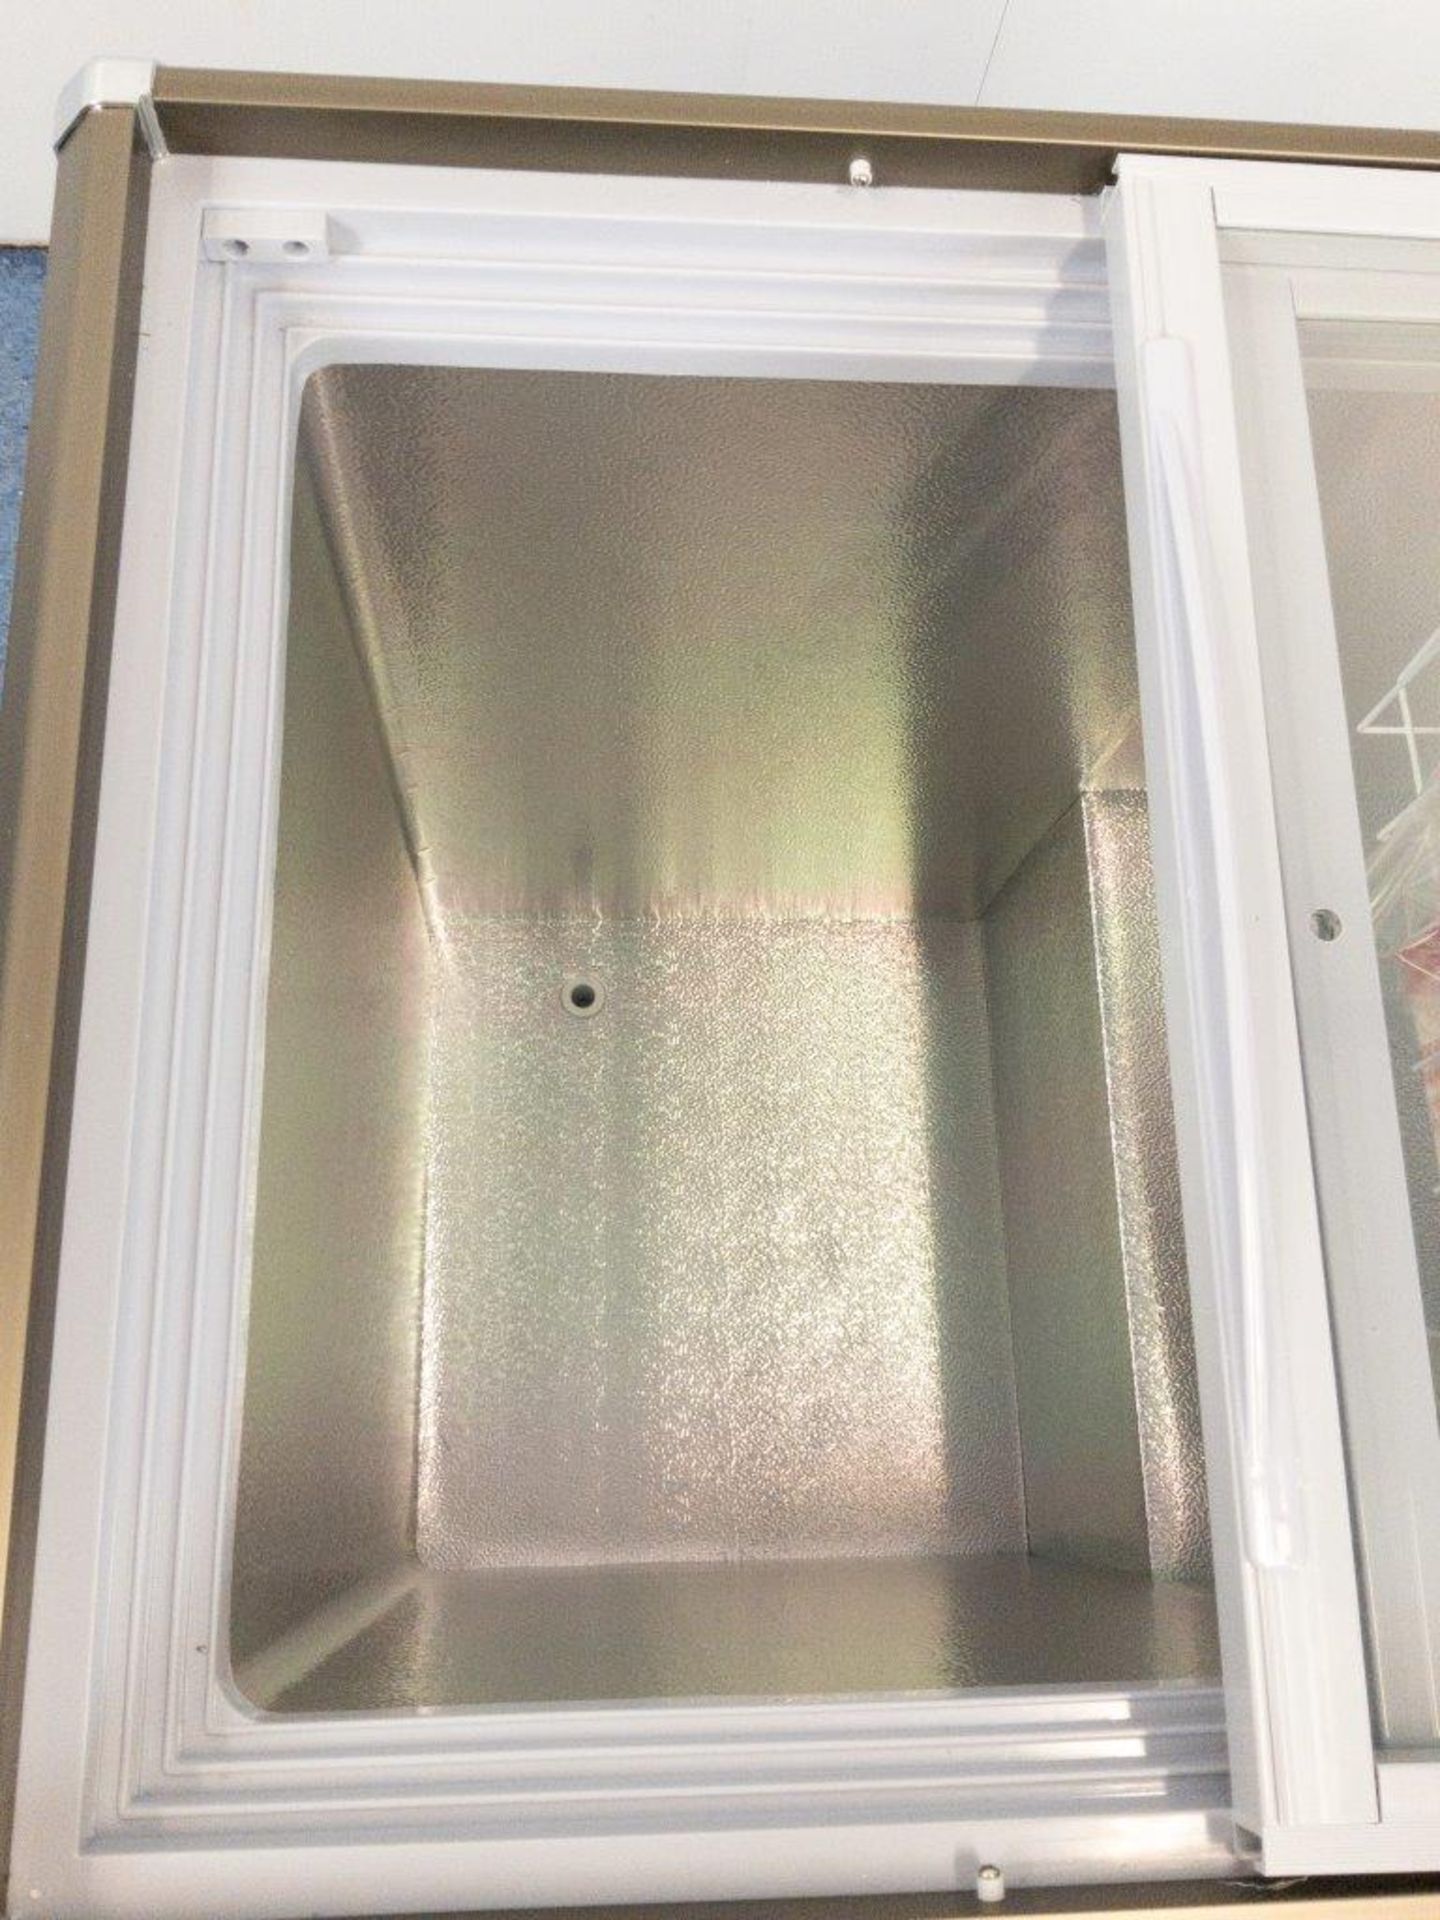 29" FLAT GLASS SLIDING TOP CHEST FREEZER, OMCAN 45291 - Image 6 of 8